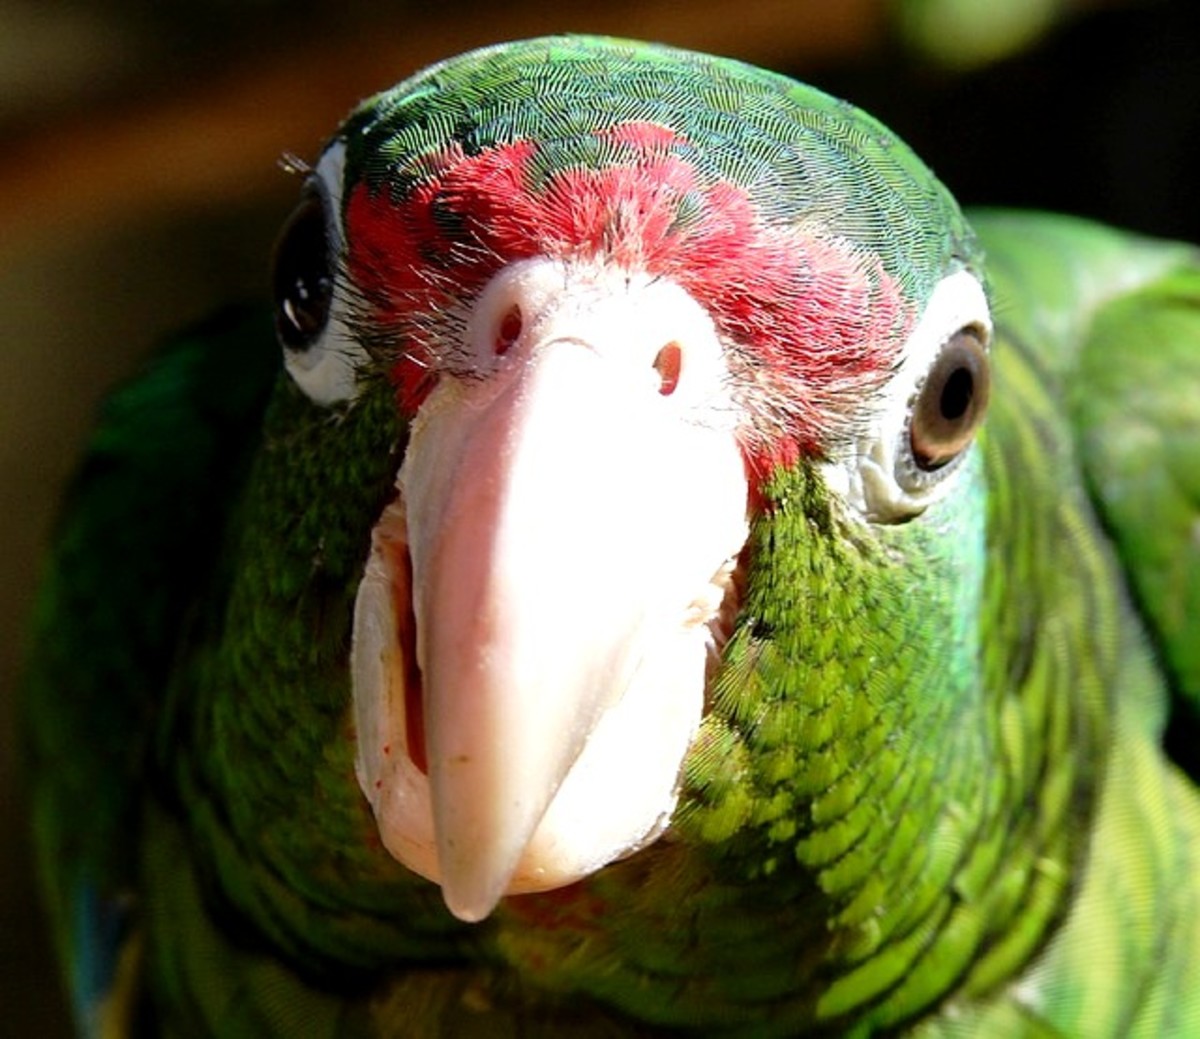 A parrot will carefully observe and learn, and you can use this to teach them to talk.